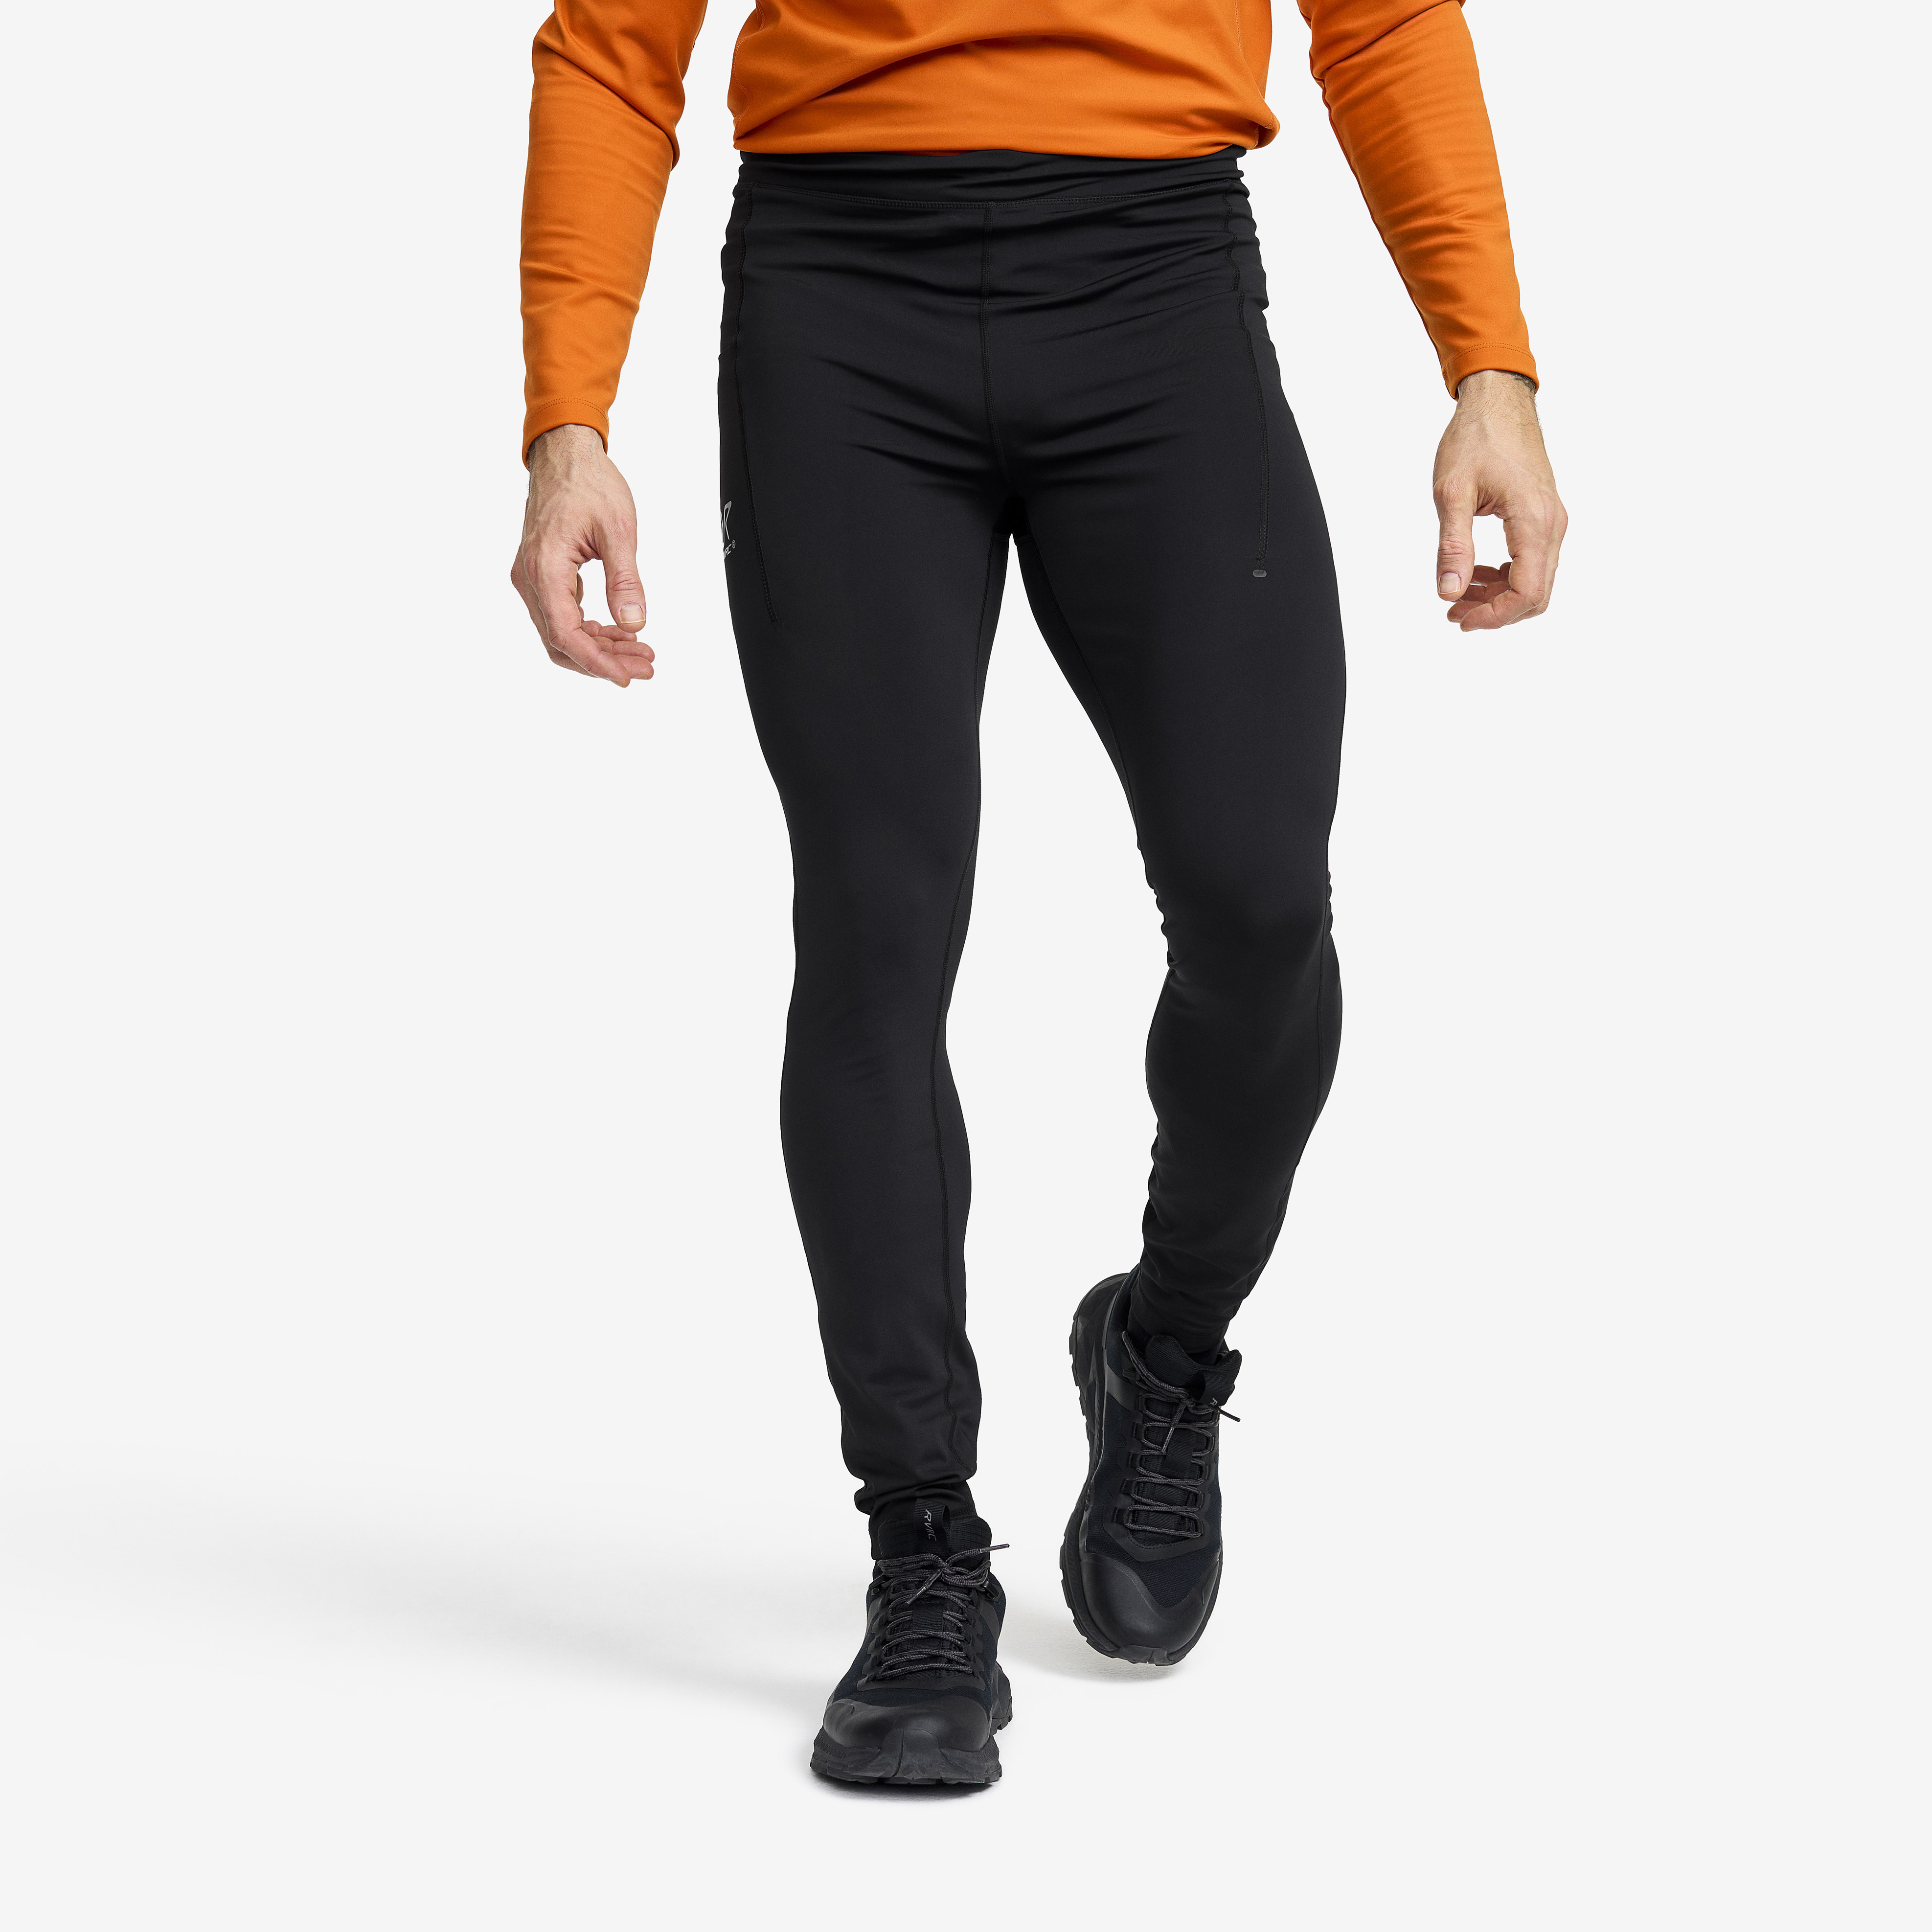 Men's Tights Compression Pants -Fitness, and Running Leggings